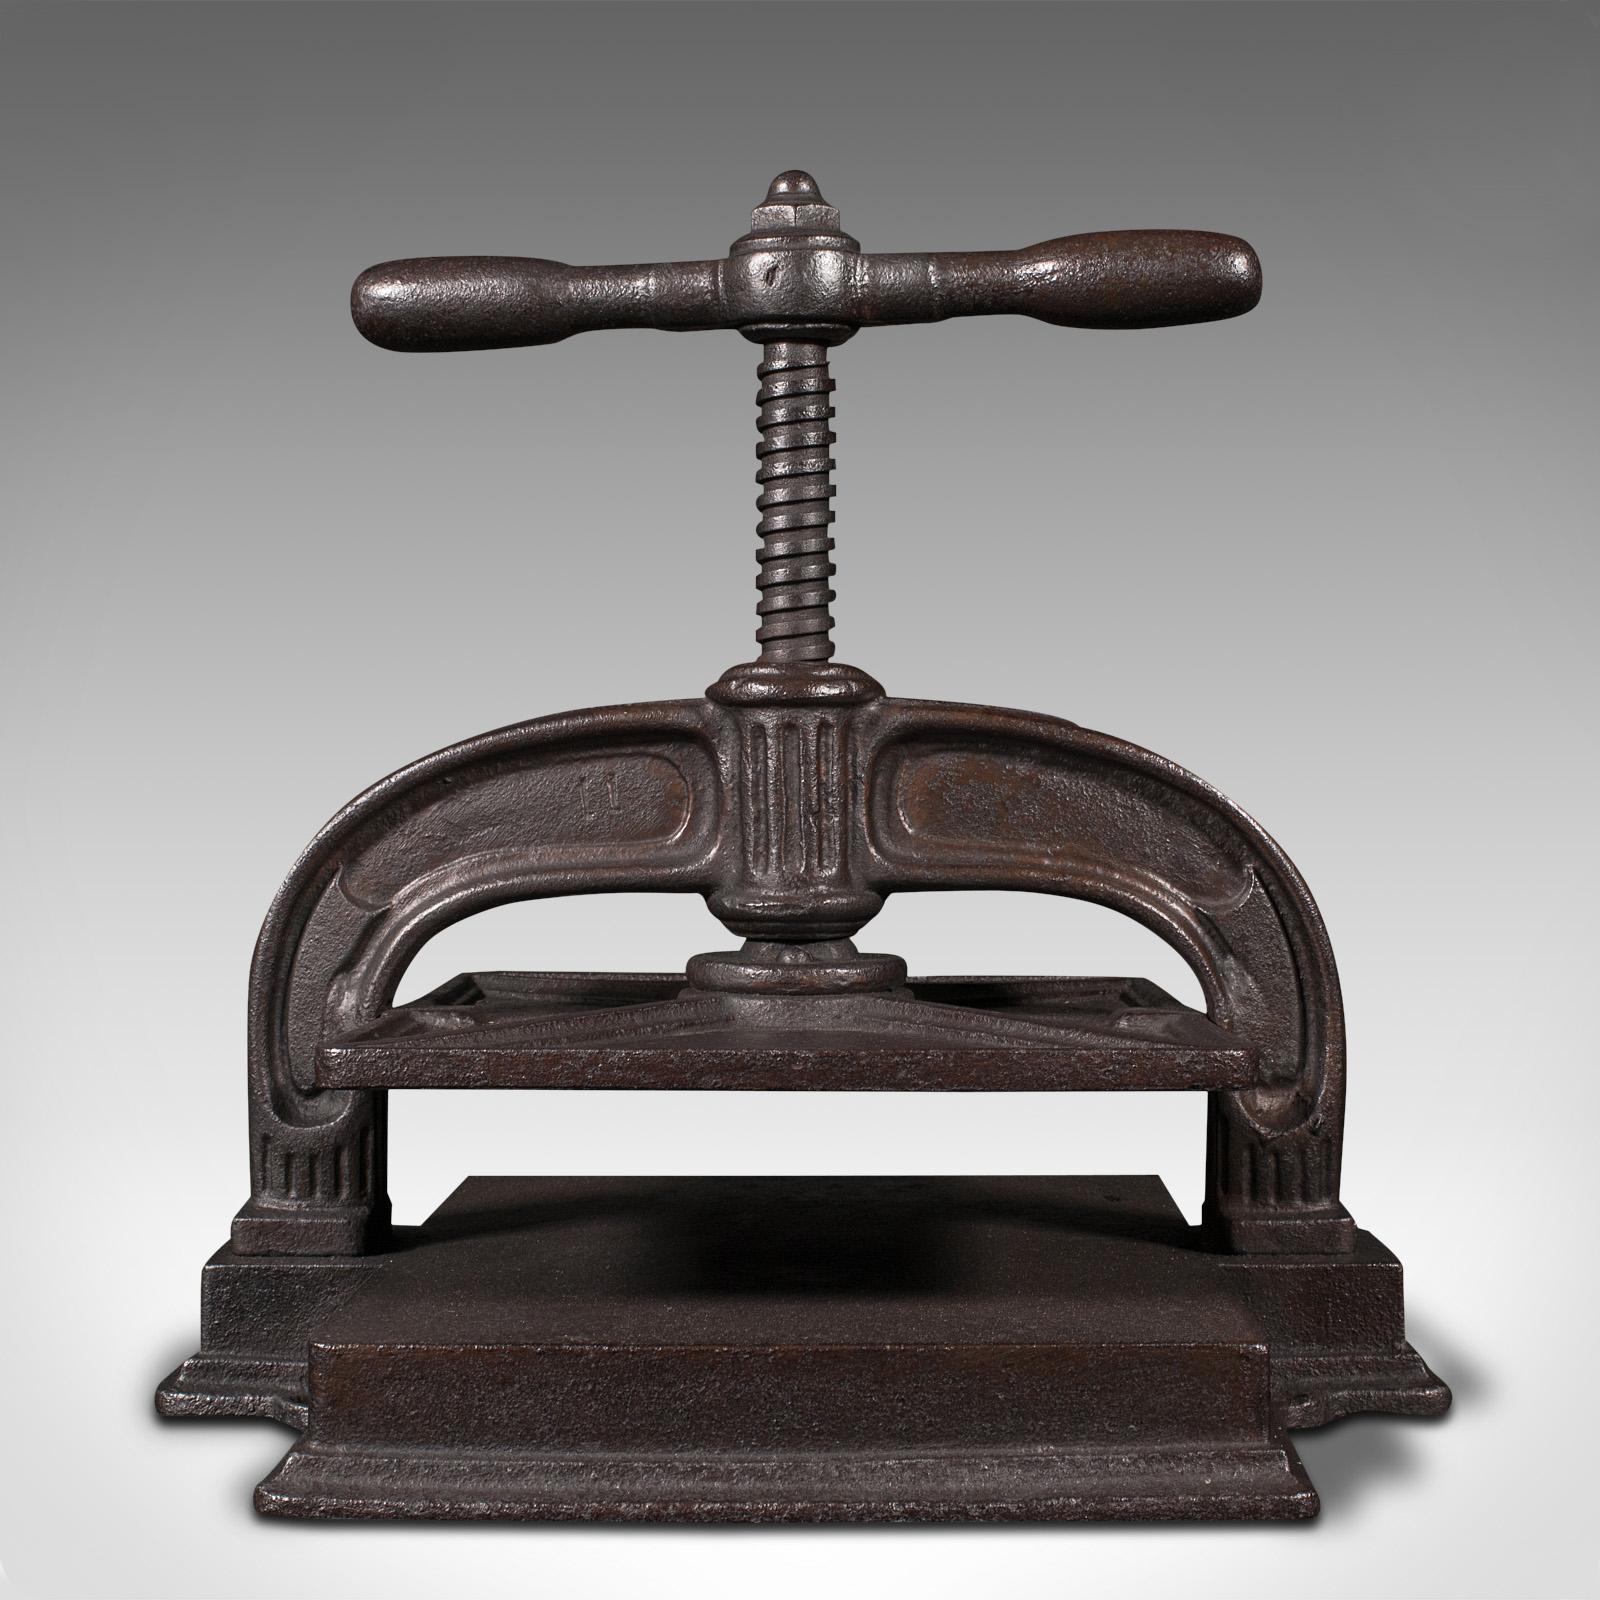 This is an antique tabletop press. An English, cast iron rotary flower pressing machine, dating to the early Victorian period, circa 1850.

Relive the Victorian past-time with this delightful press
Displays a desirable aged patina and in good